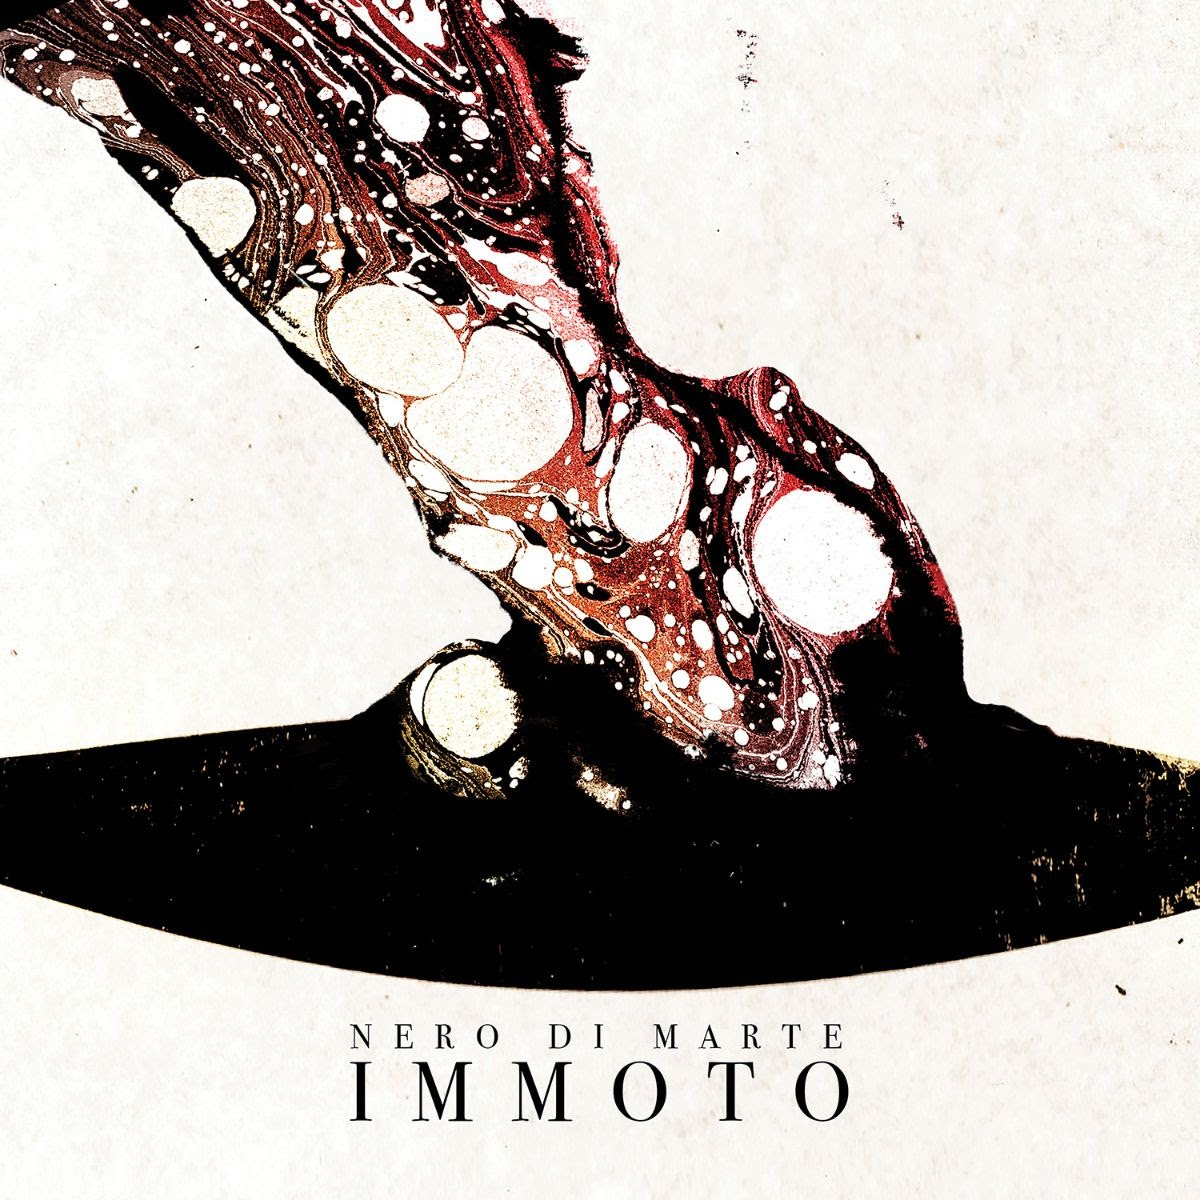 New album ‘IMMOTO’ out Jan 24th 2020